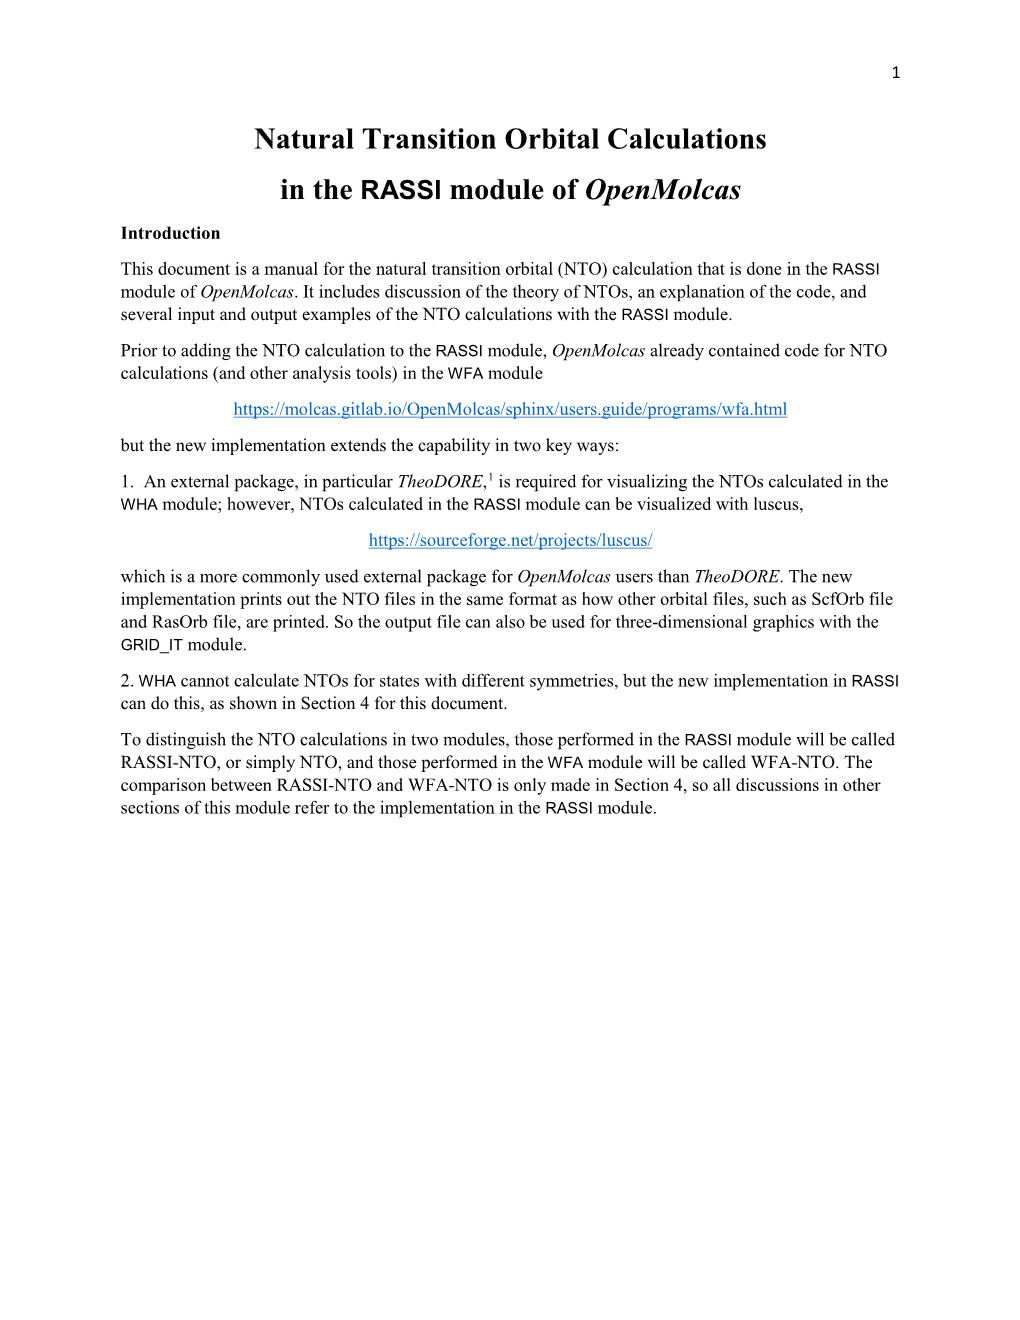 Natural Transition Orbital Calculations in the RASSI Module of Openmolcas Introduction